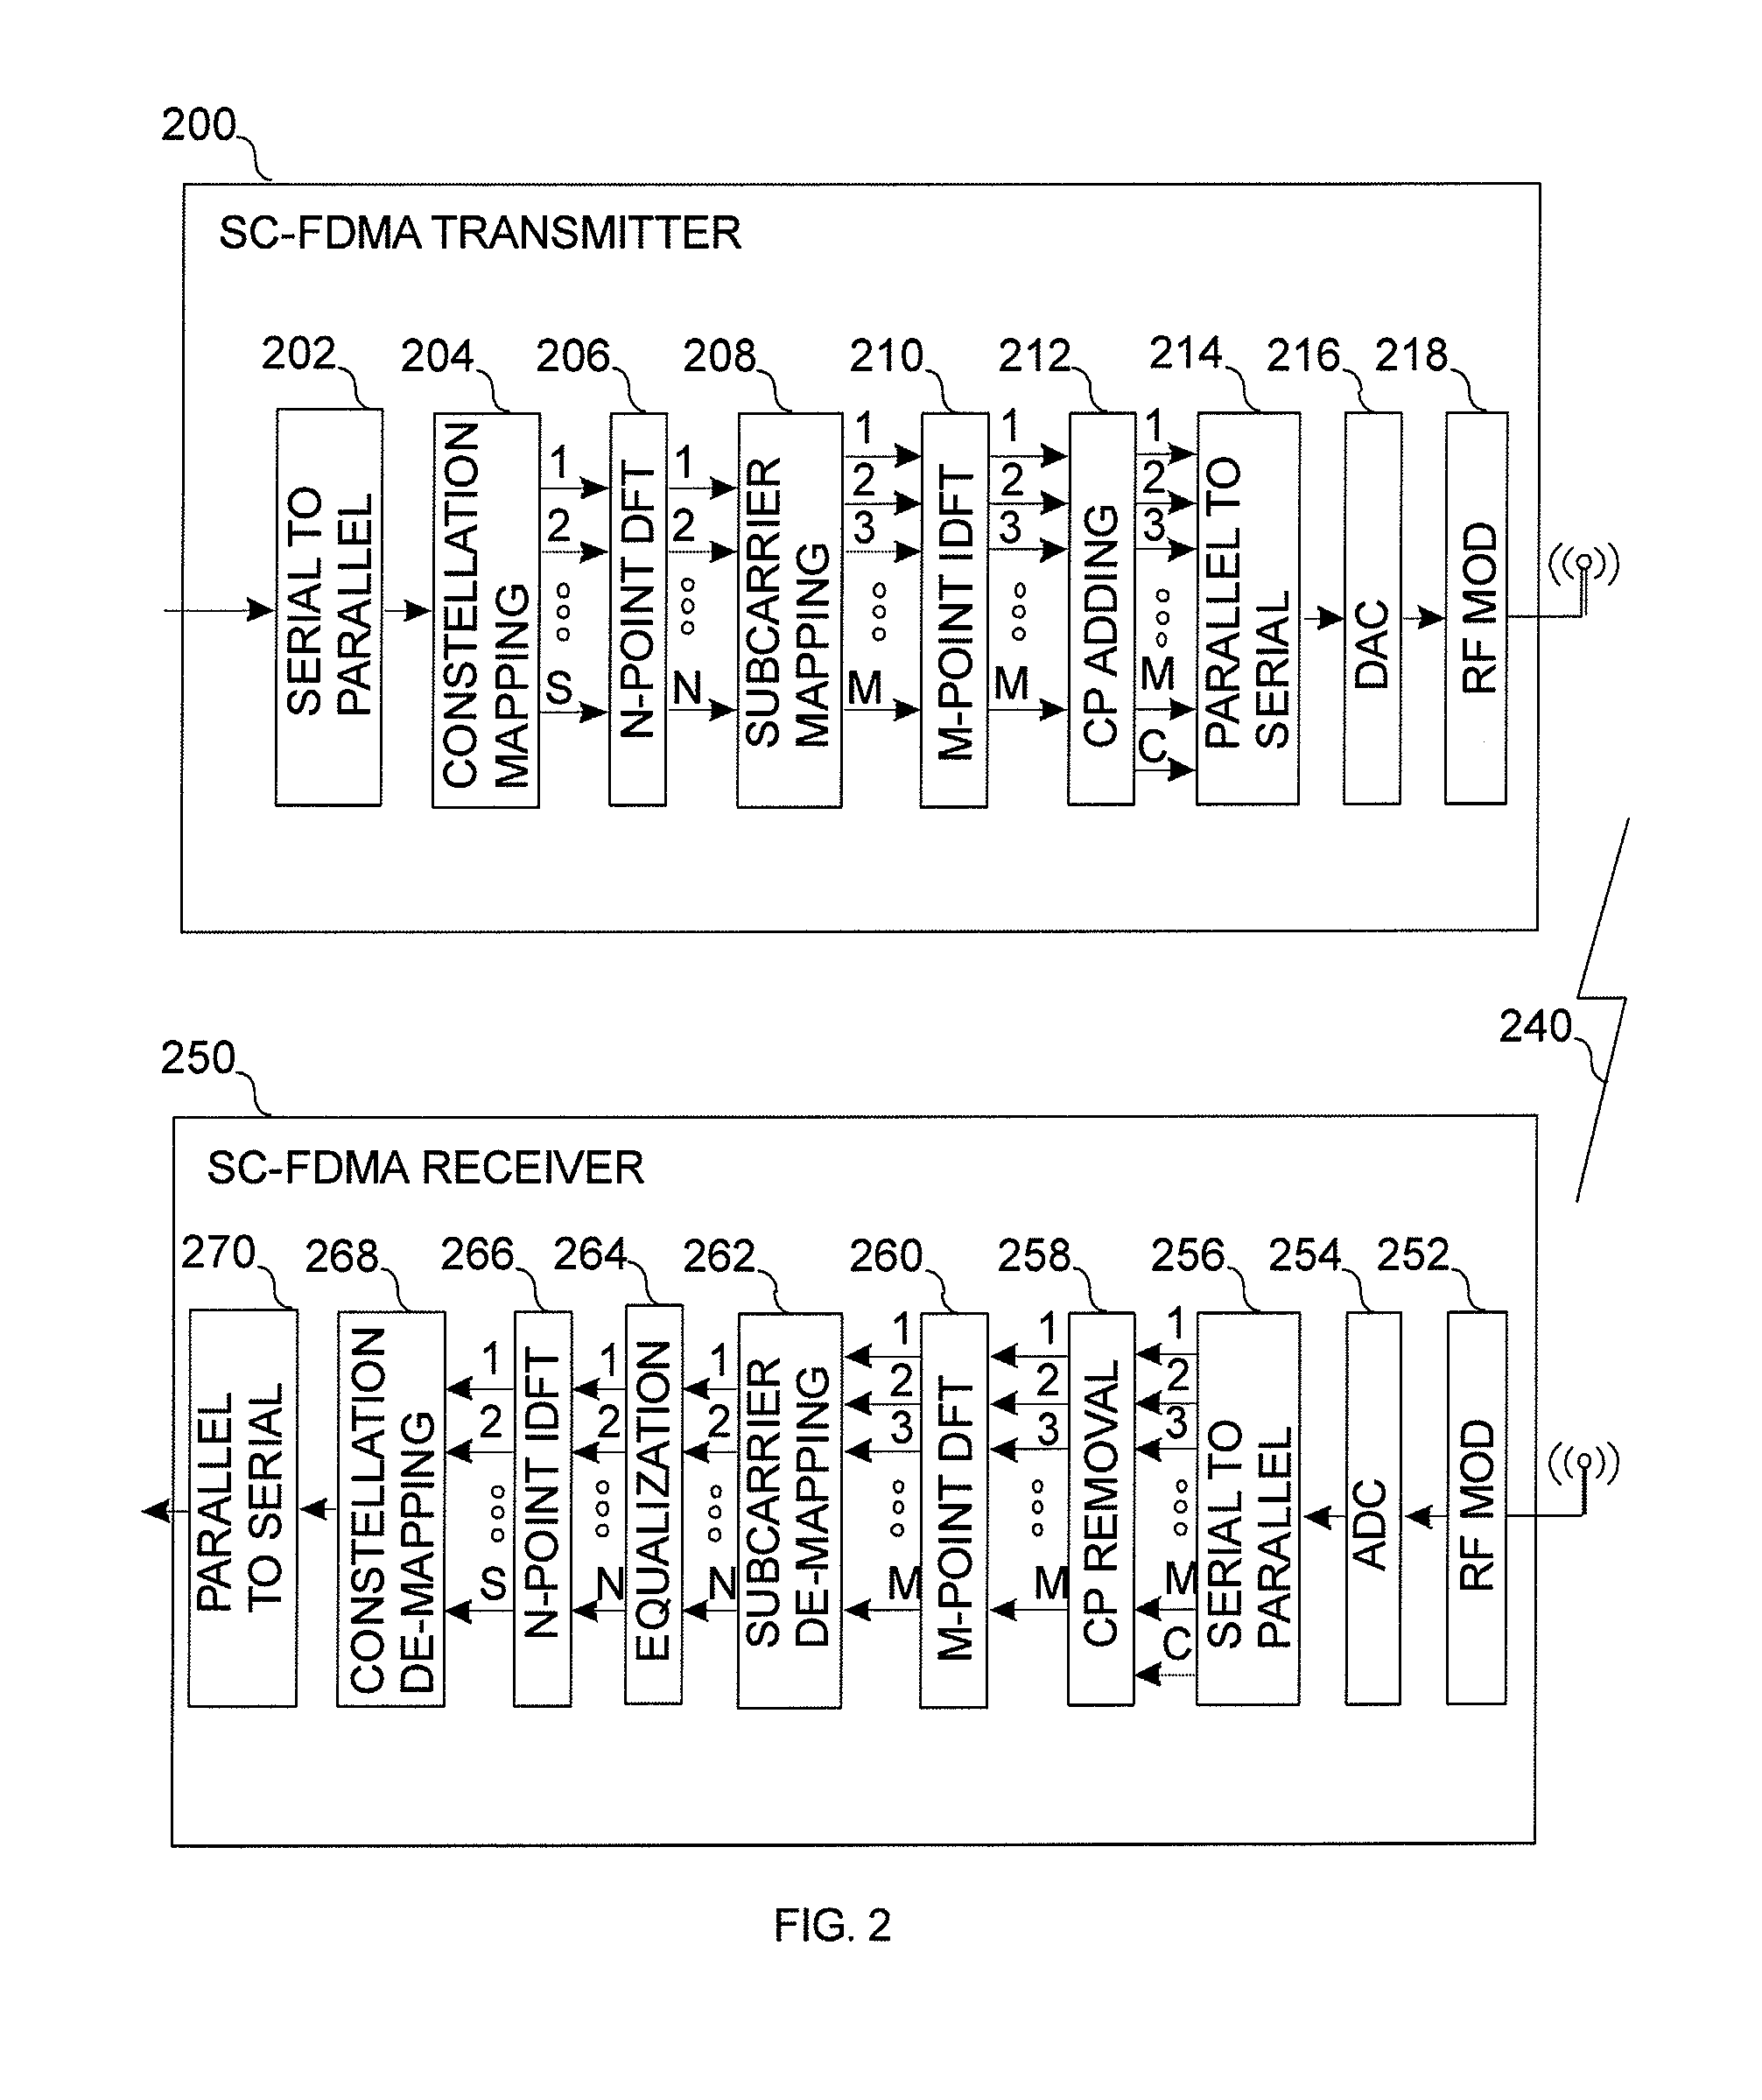 Method for setting a mobile node specific cyclic prefix in a mobile communication